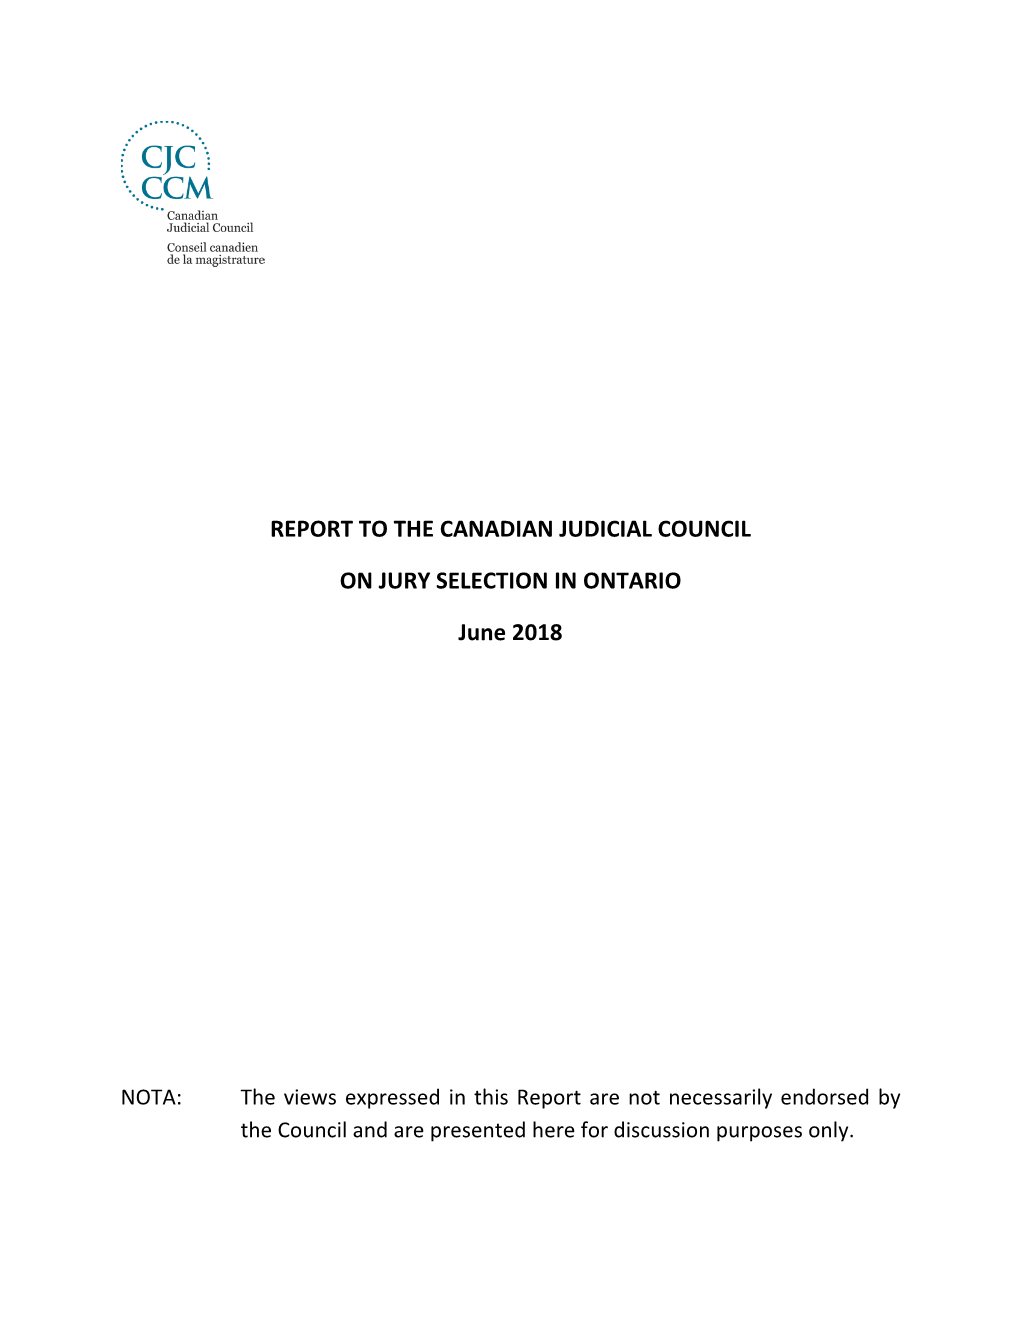 Report to the Canadian Judicial Council on Jury